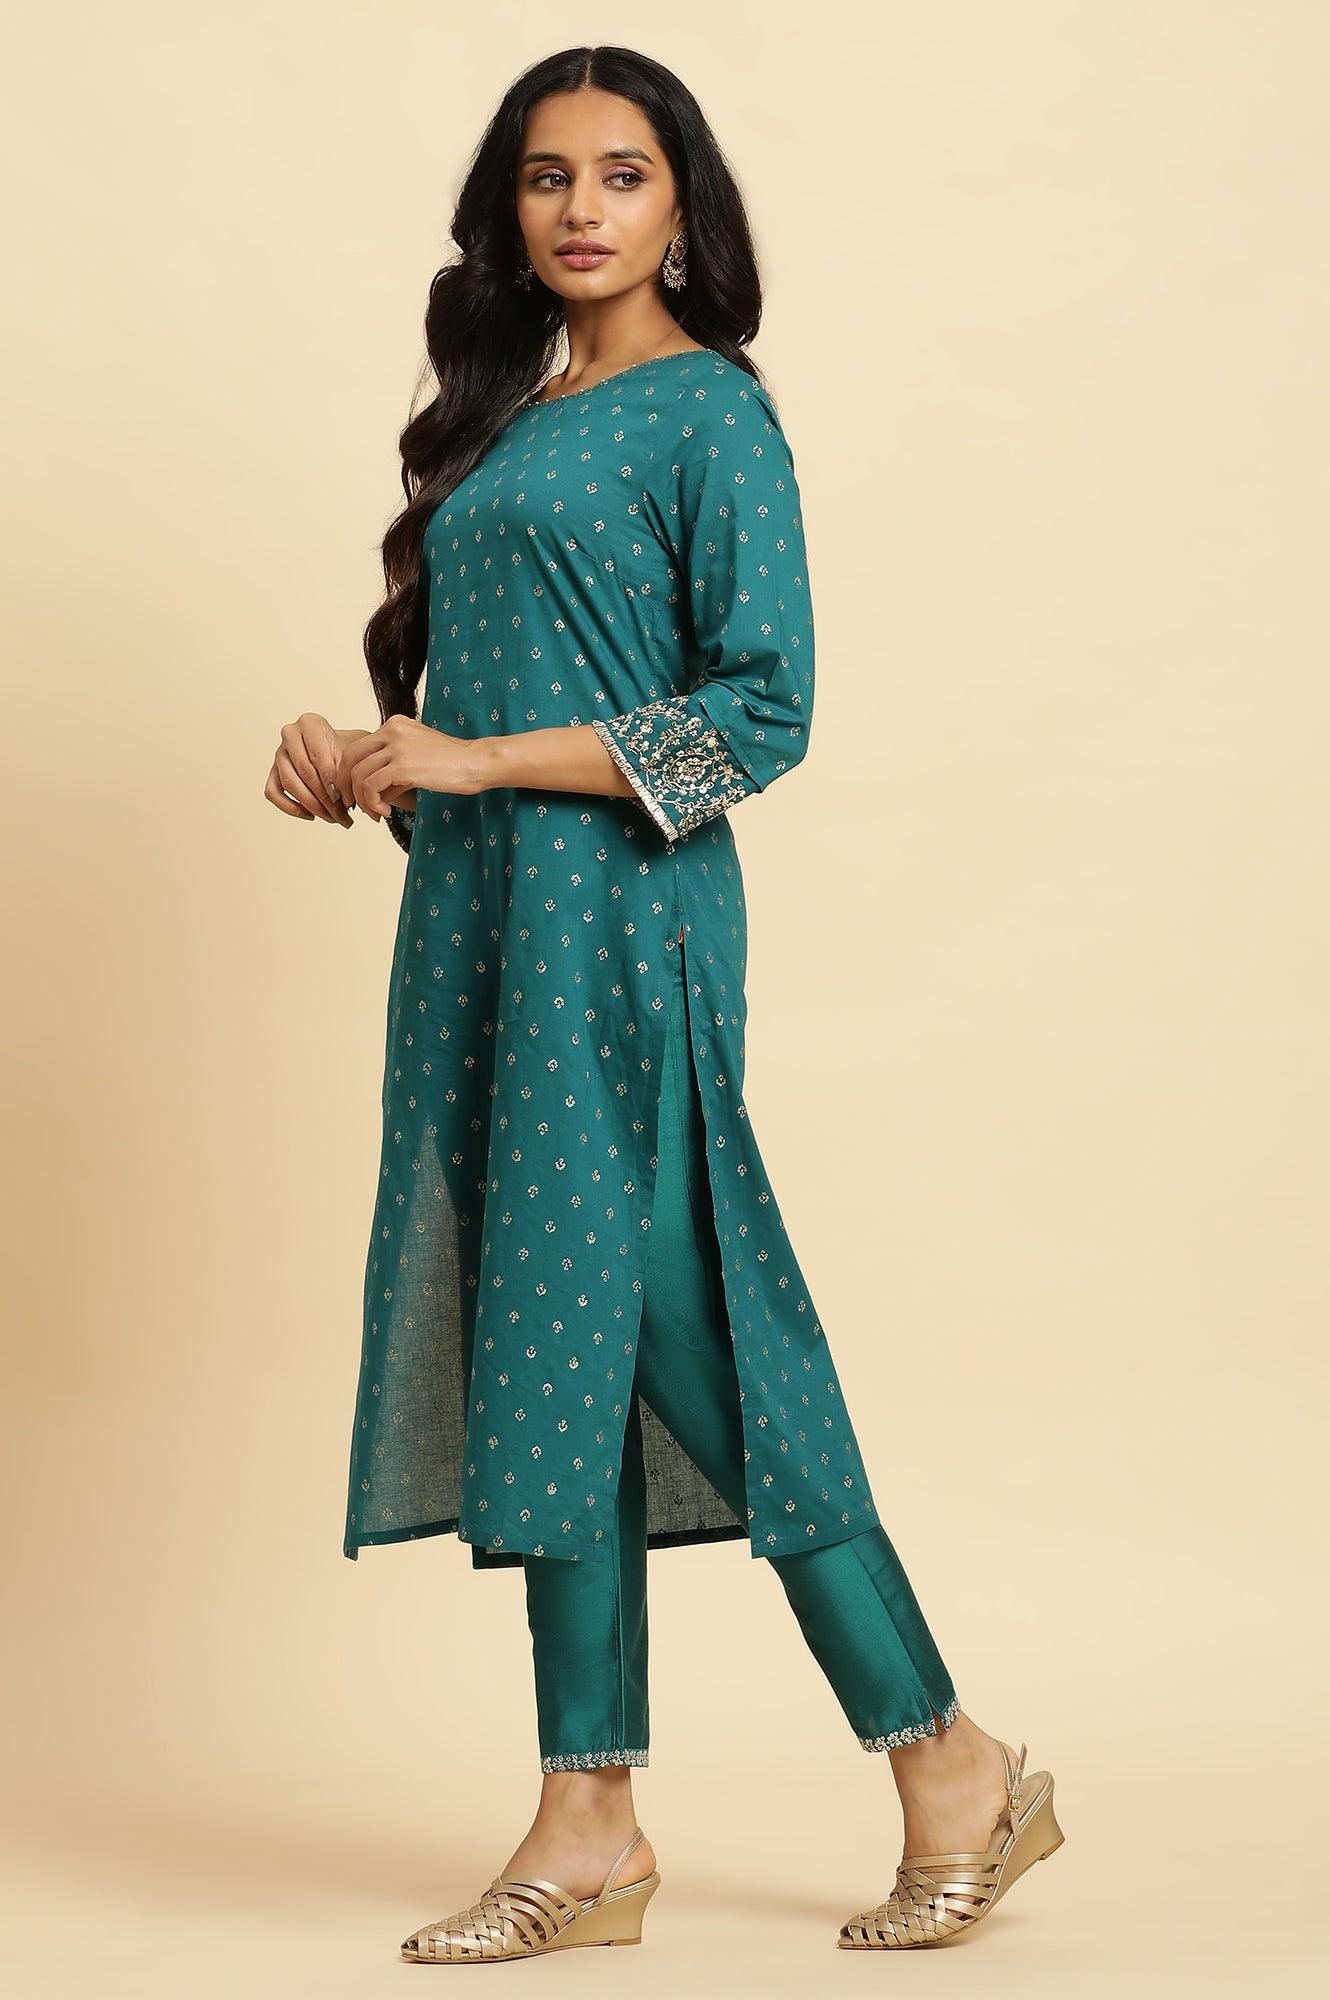 Teal Blue Slim Pant With Embroidered Hemline - wforwoman